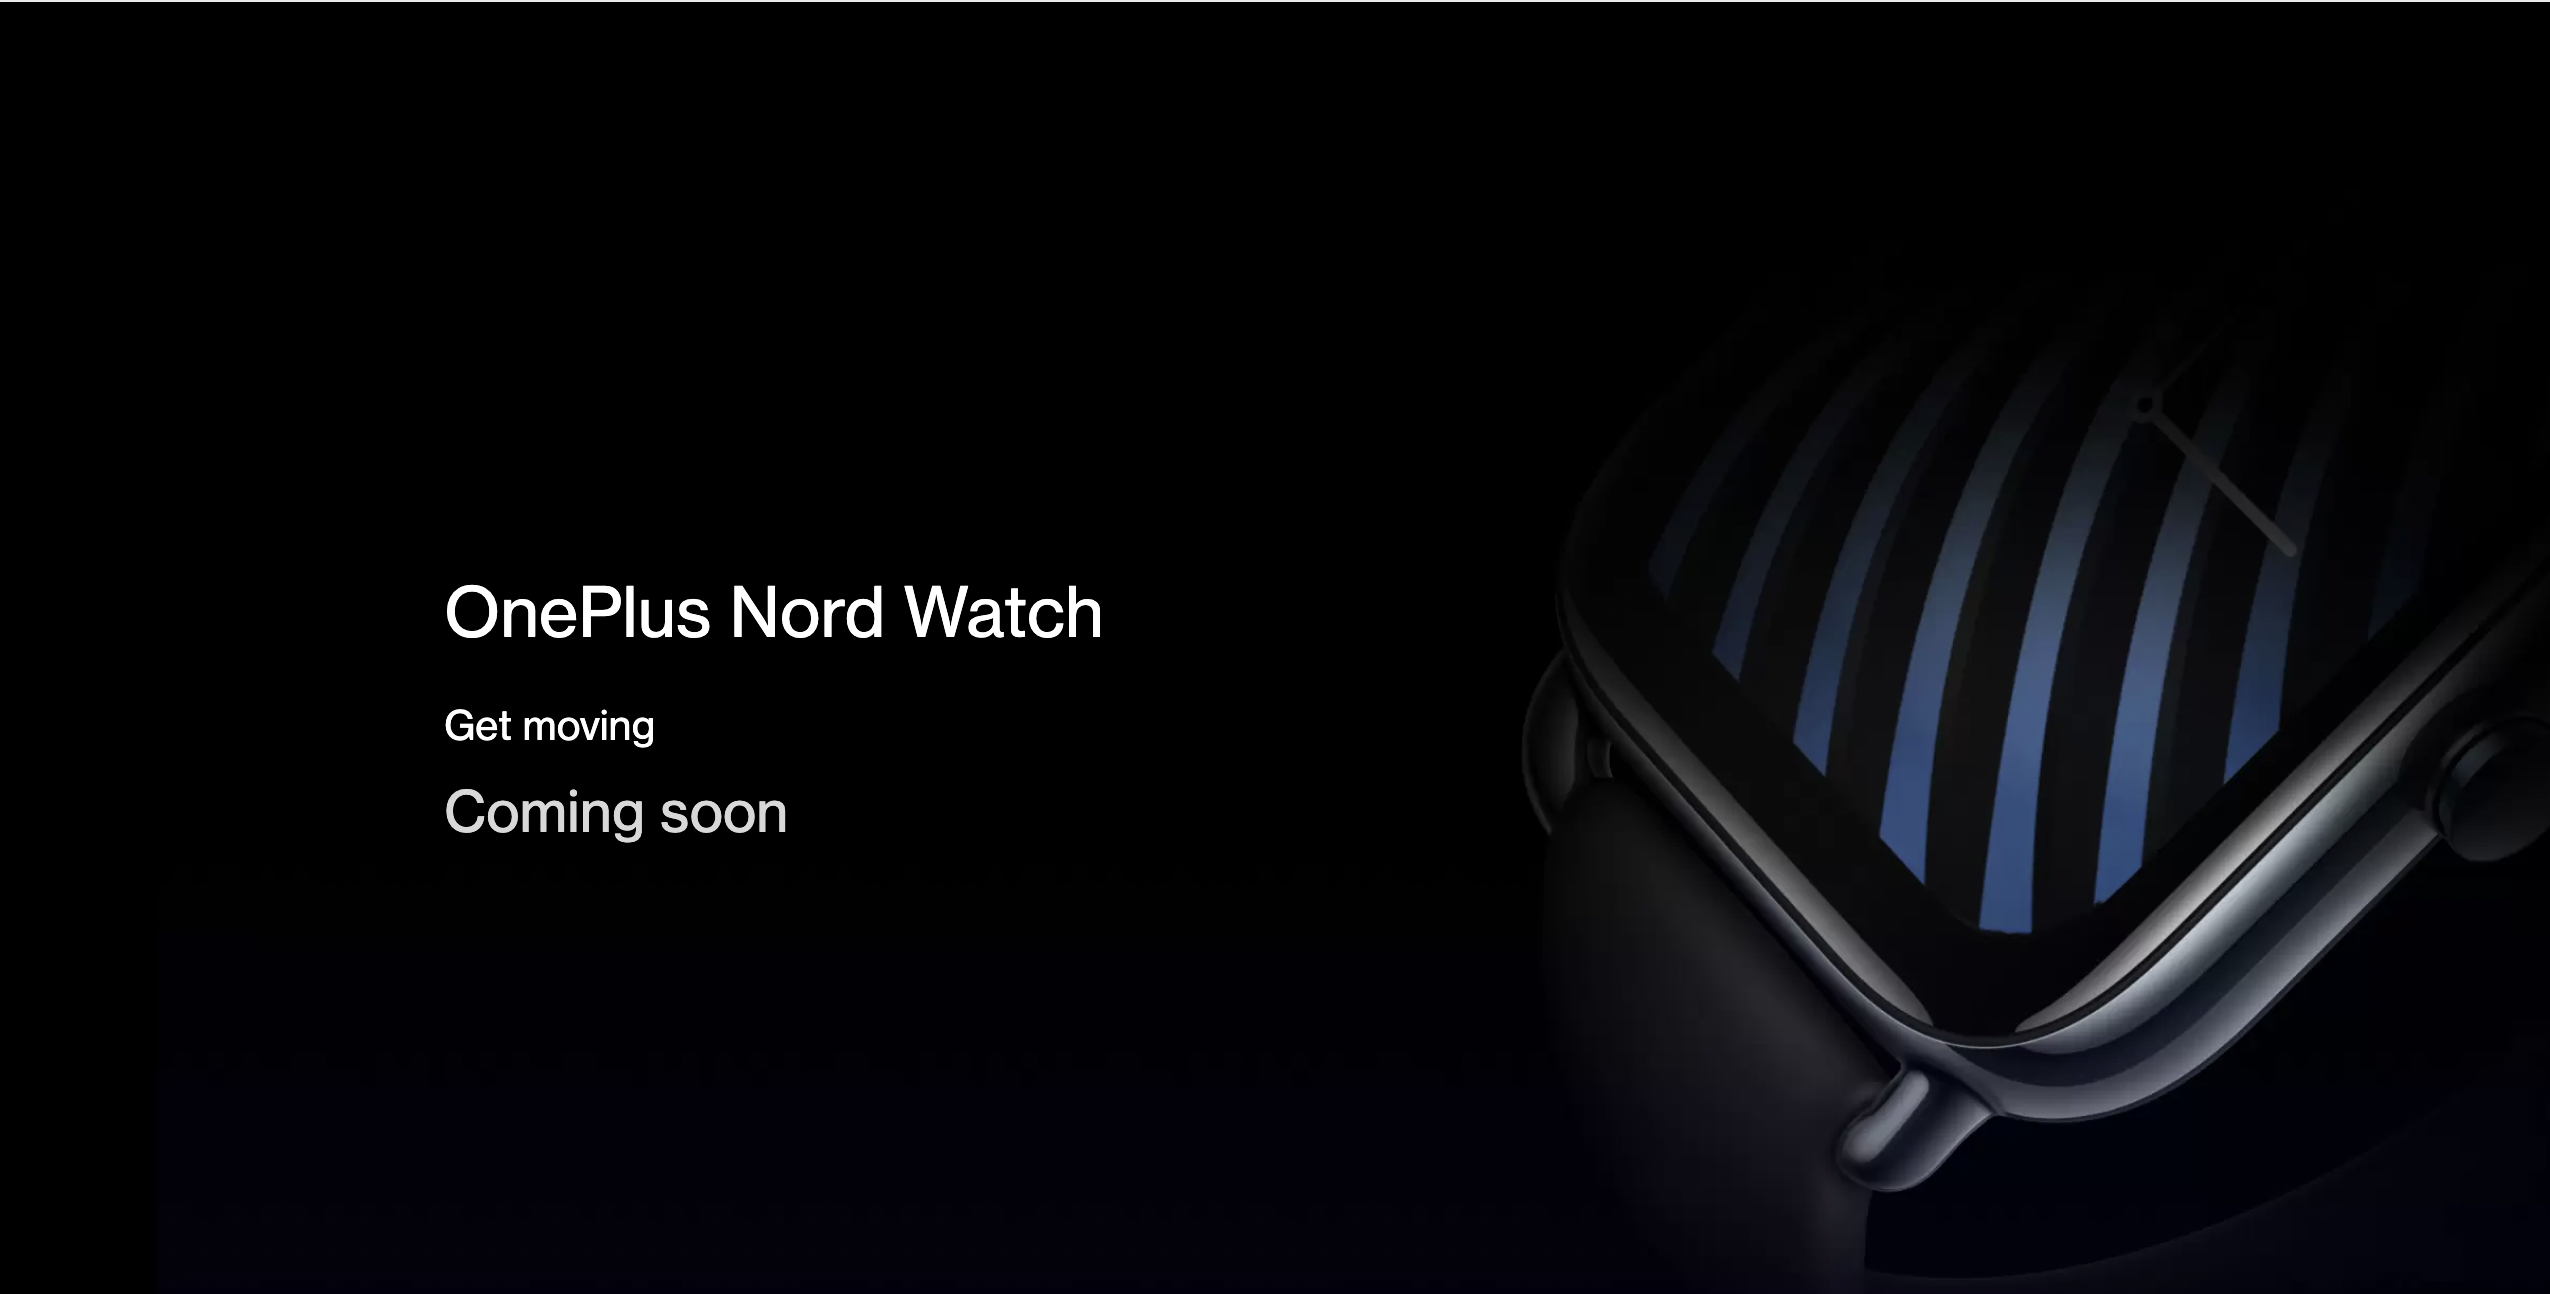 OnePlus is set to launch first Nord smartwatch soon, may take on Realme, Xiaomi and others